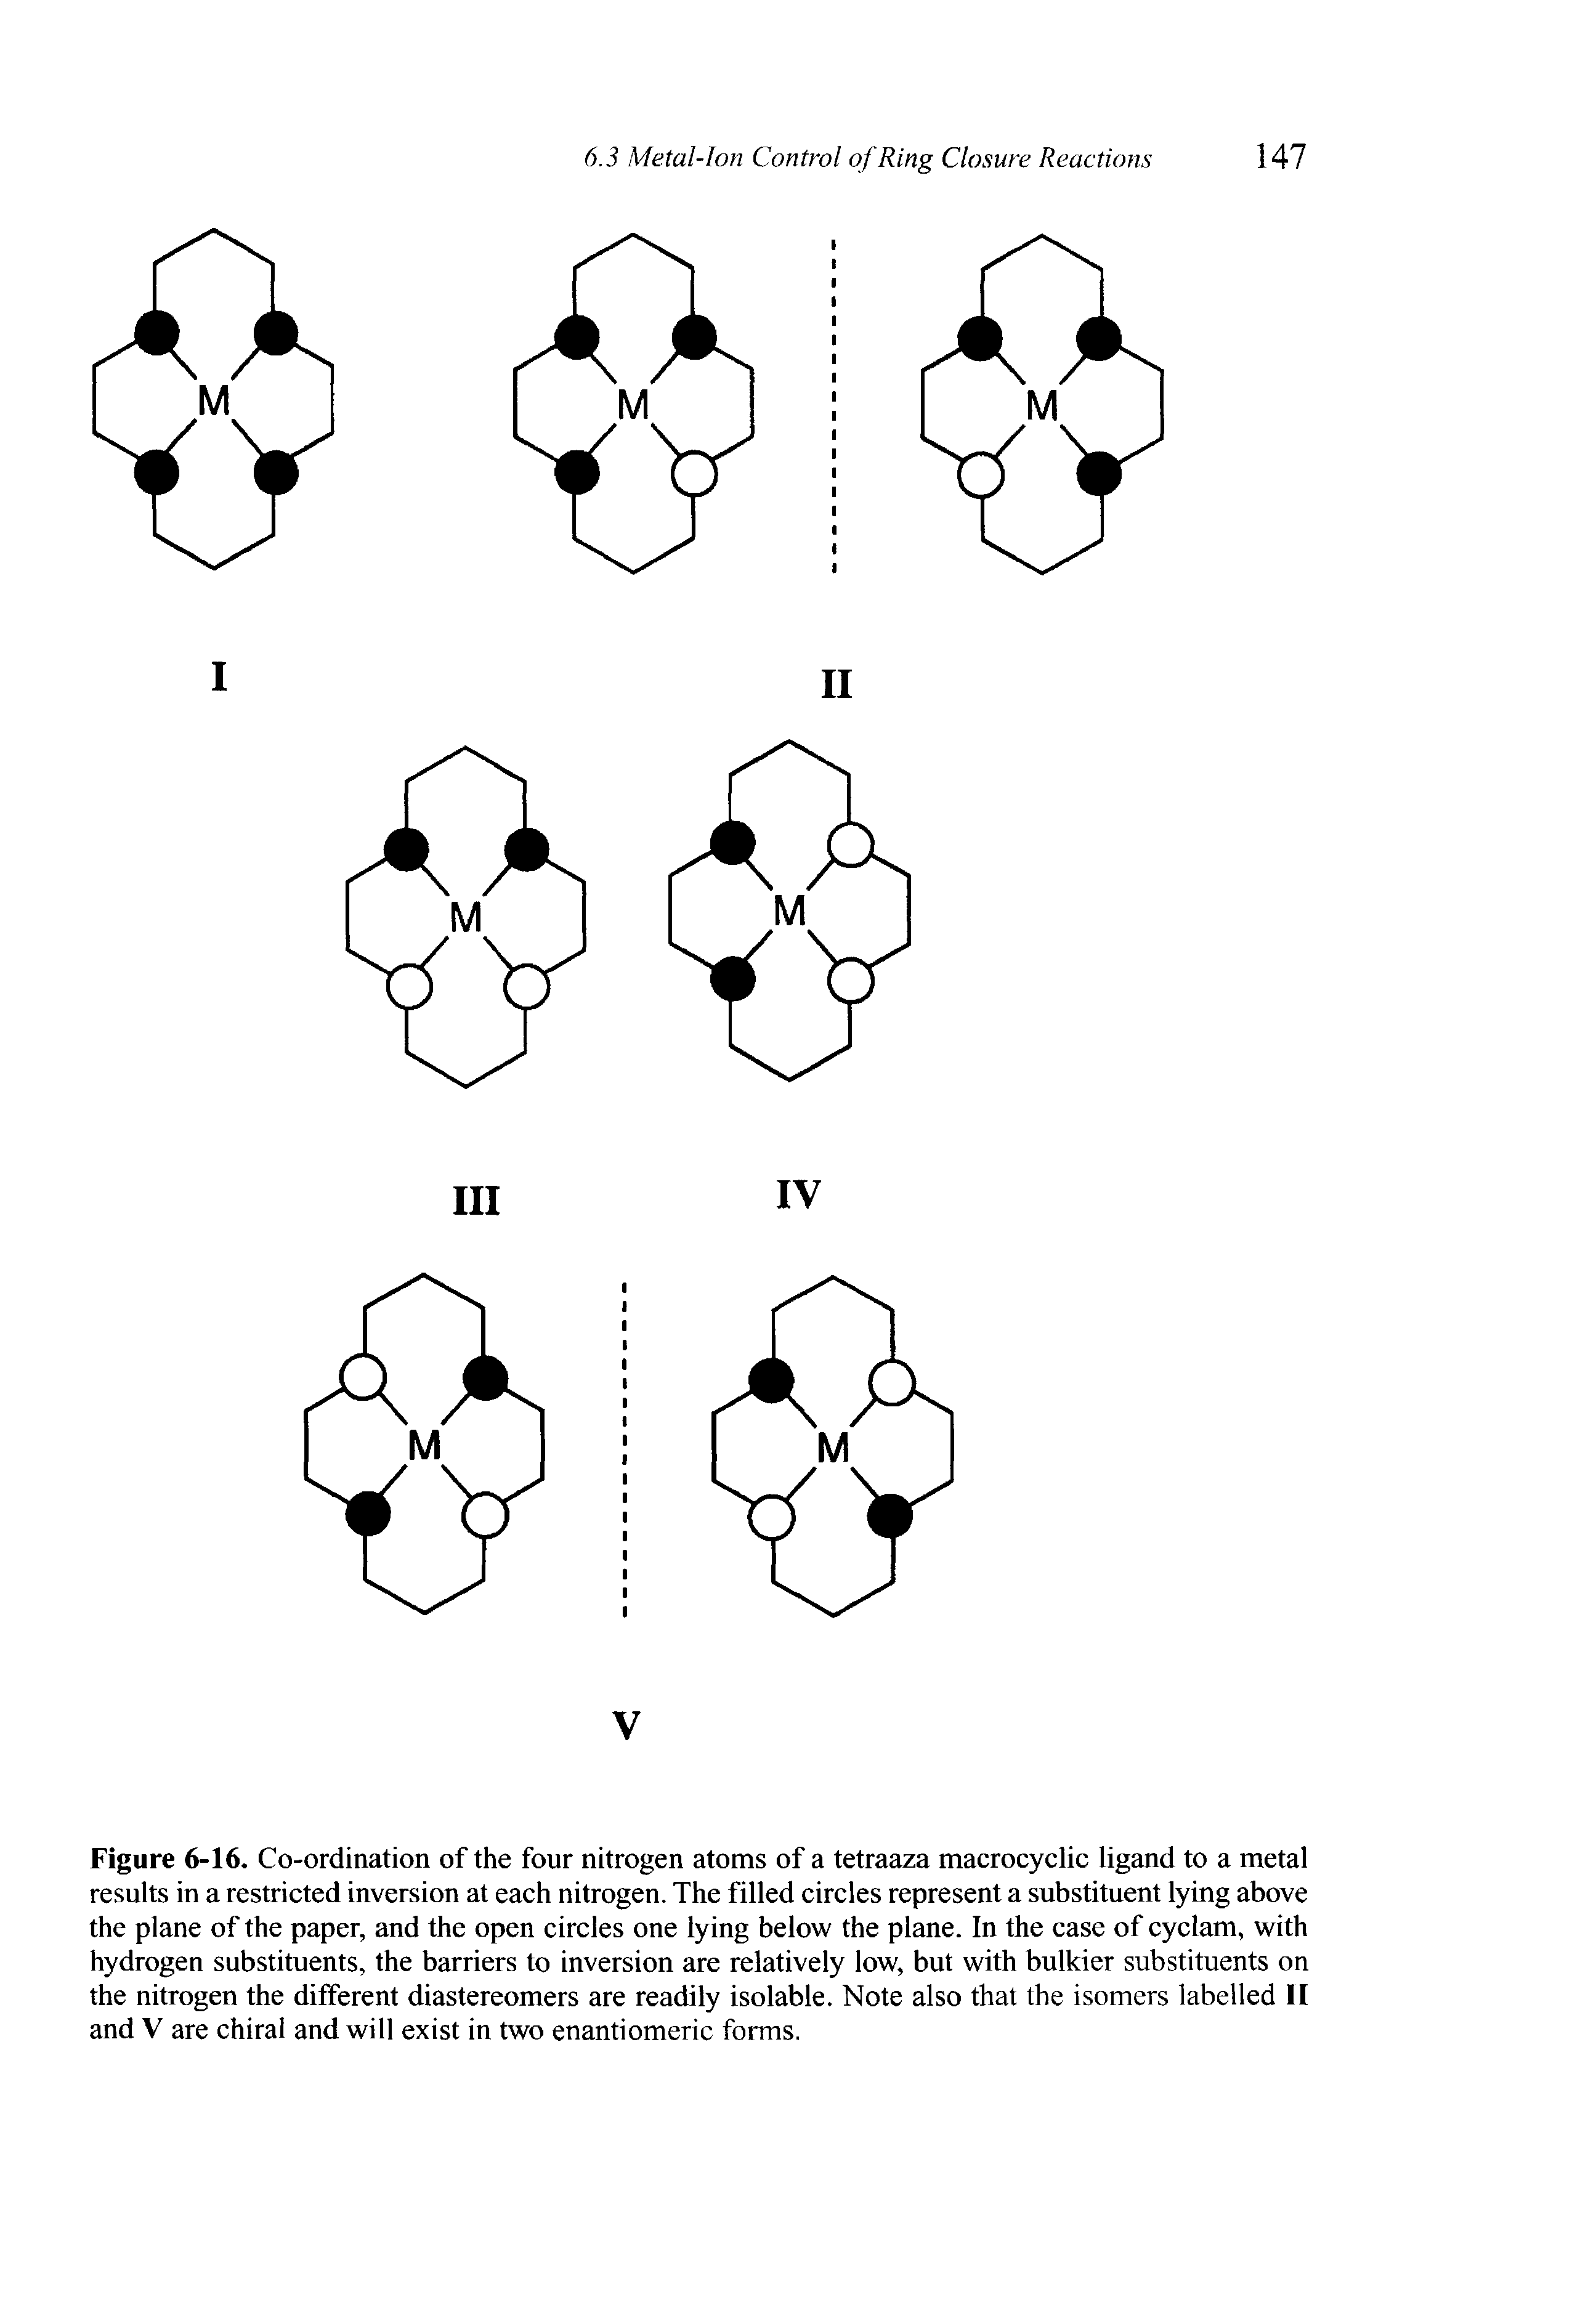 Figure 6-16. Co-ordination of the four nitrogen atoms of a tetraaza macrocyclic ligand to a metal results in a restricted inversion at each nitrogen. The filled circles represent a substituent lying above the plane of the paper, and the open circles one lying below the plane. In the case of cyclam, with hydrogen substituents, the barriers to inversion are relatively low, but with bulkier substituents on the nitrogen the different diastereomers are readily isolable. Note also that the isomers labelled II and V are chiral and will exist in two enantiomeric forms.